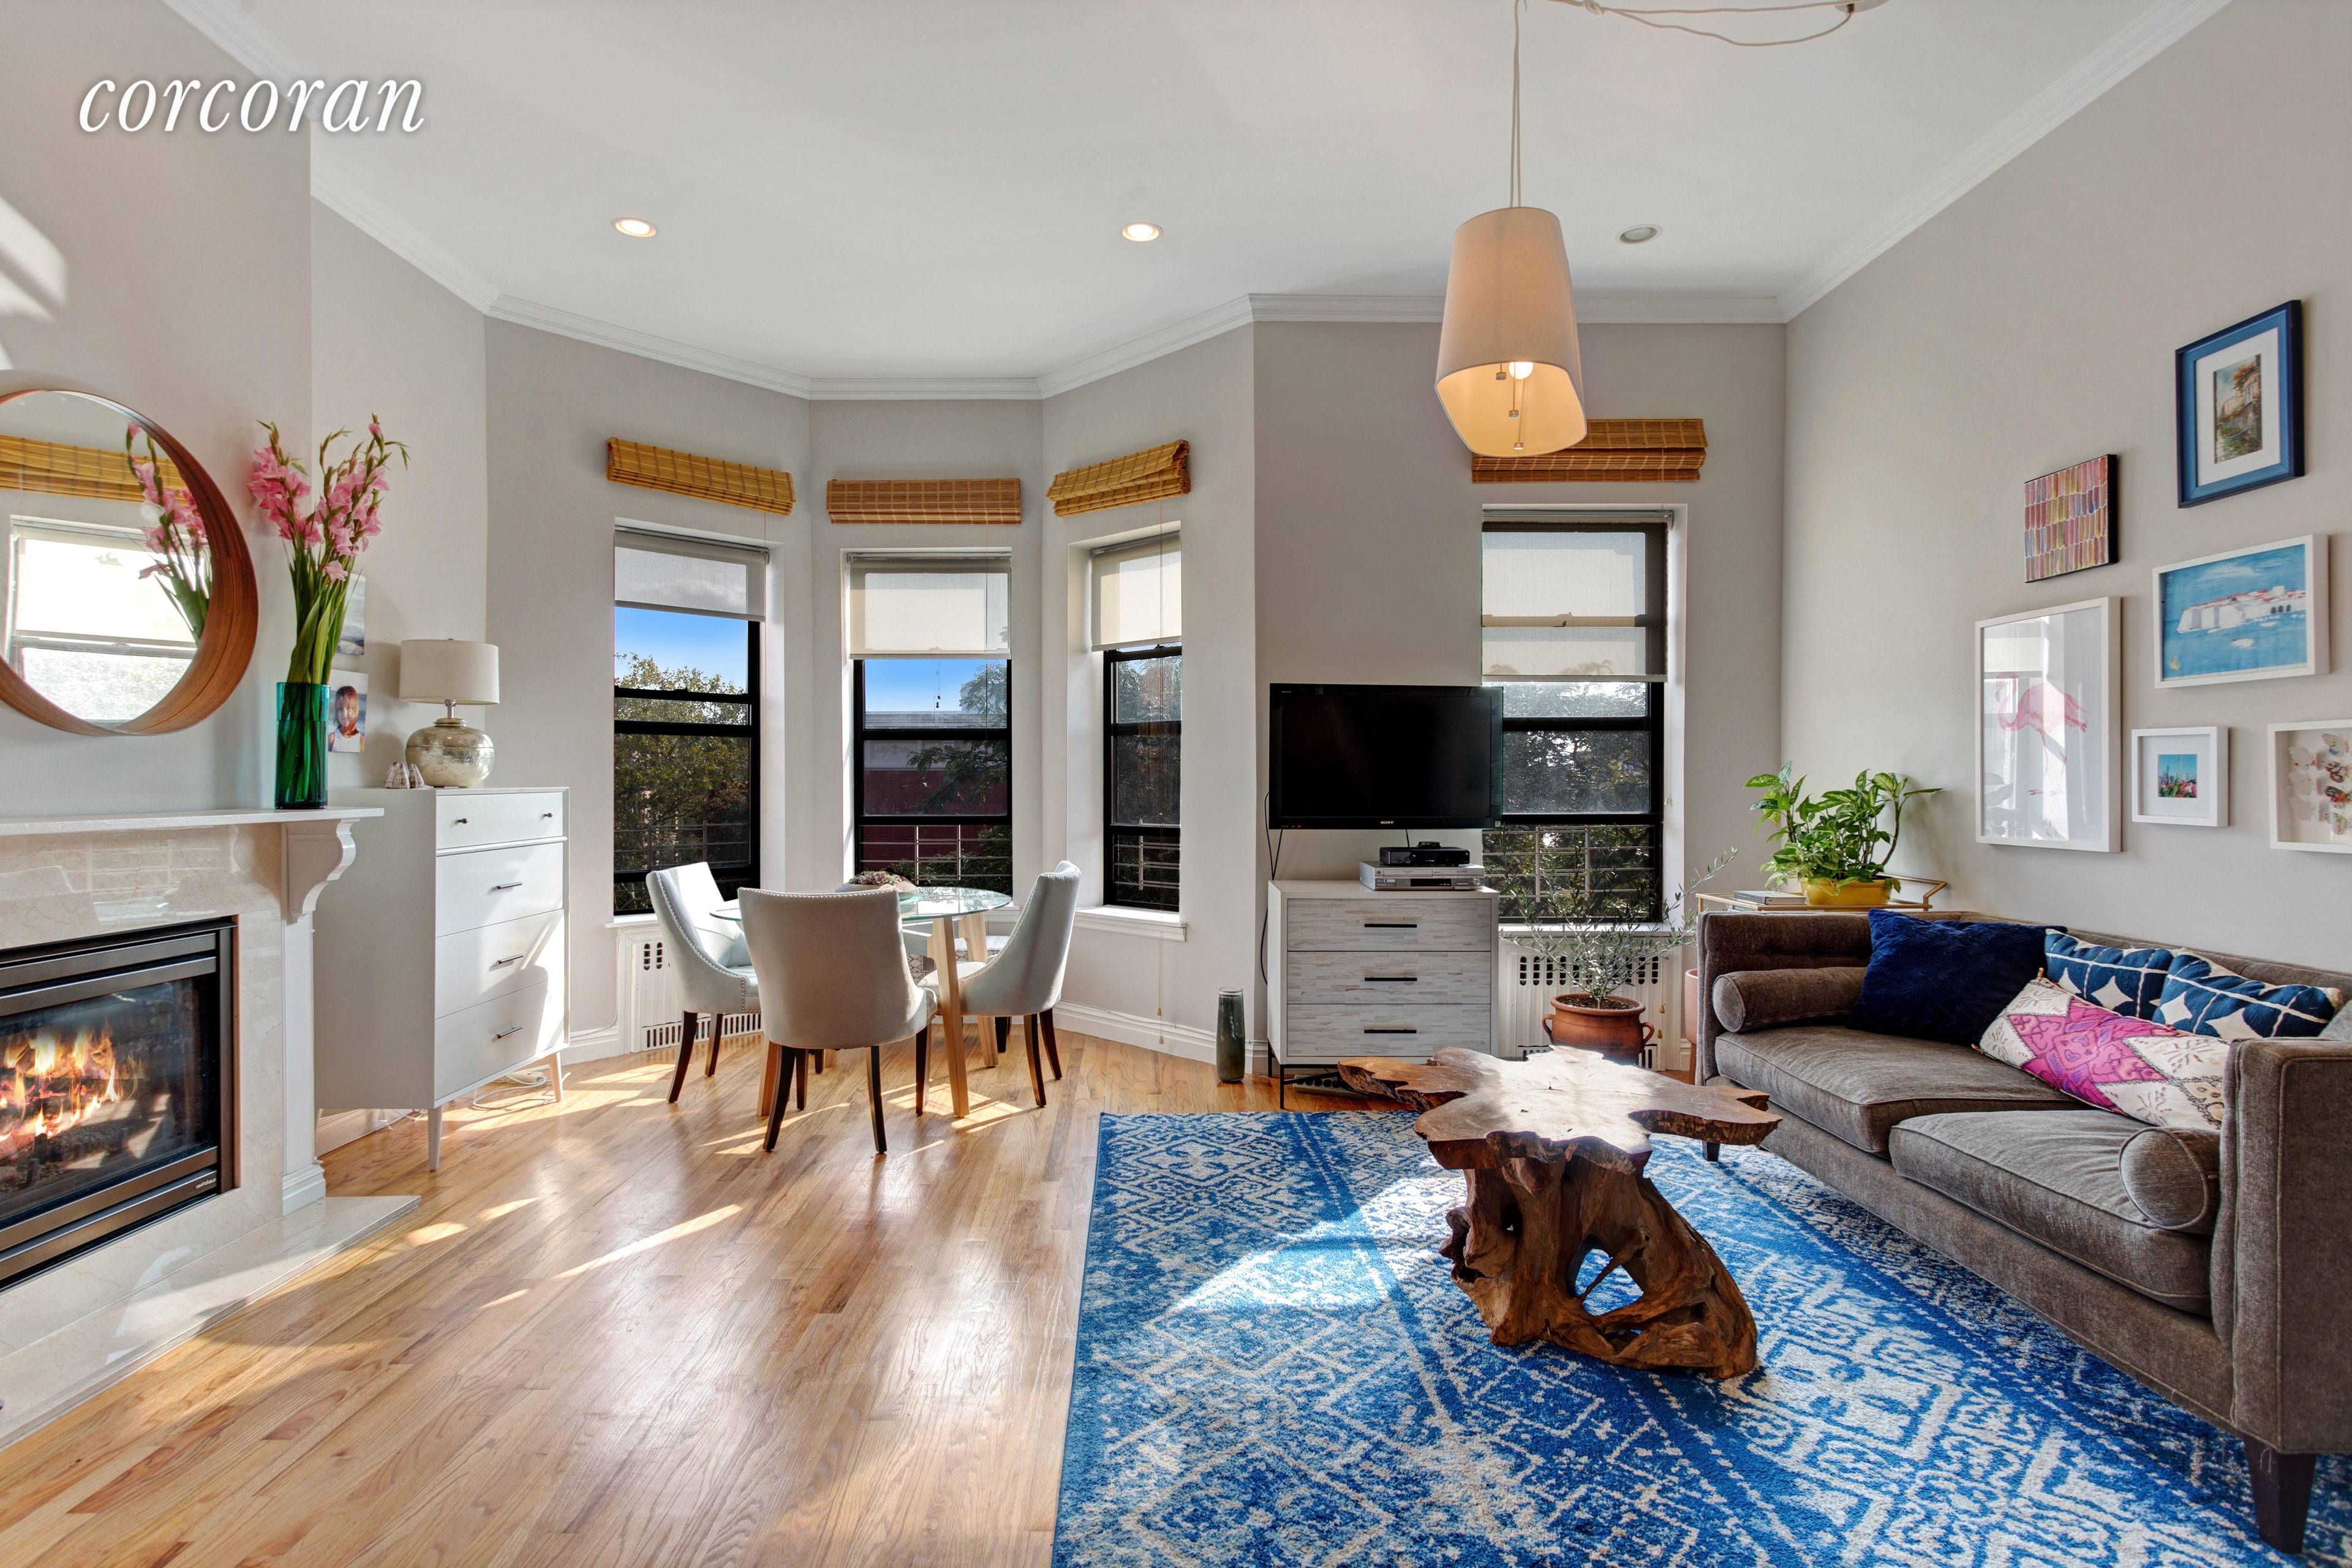 NO FEE, PRICED REDUCED, UPDATED AVAILABILITY ; NOV 1st Situated on a beautiful tree lined block in the center of Park Slope, this unit encompasses the entire top floor of ...